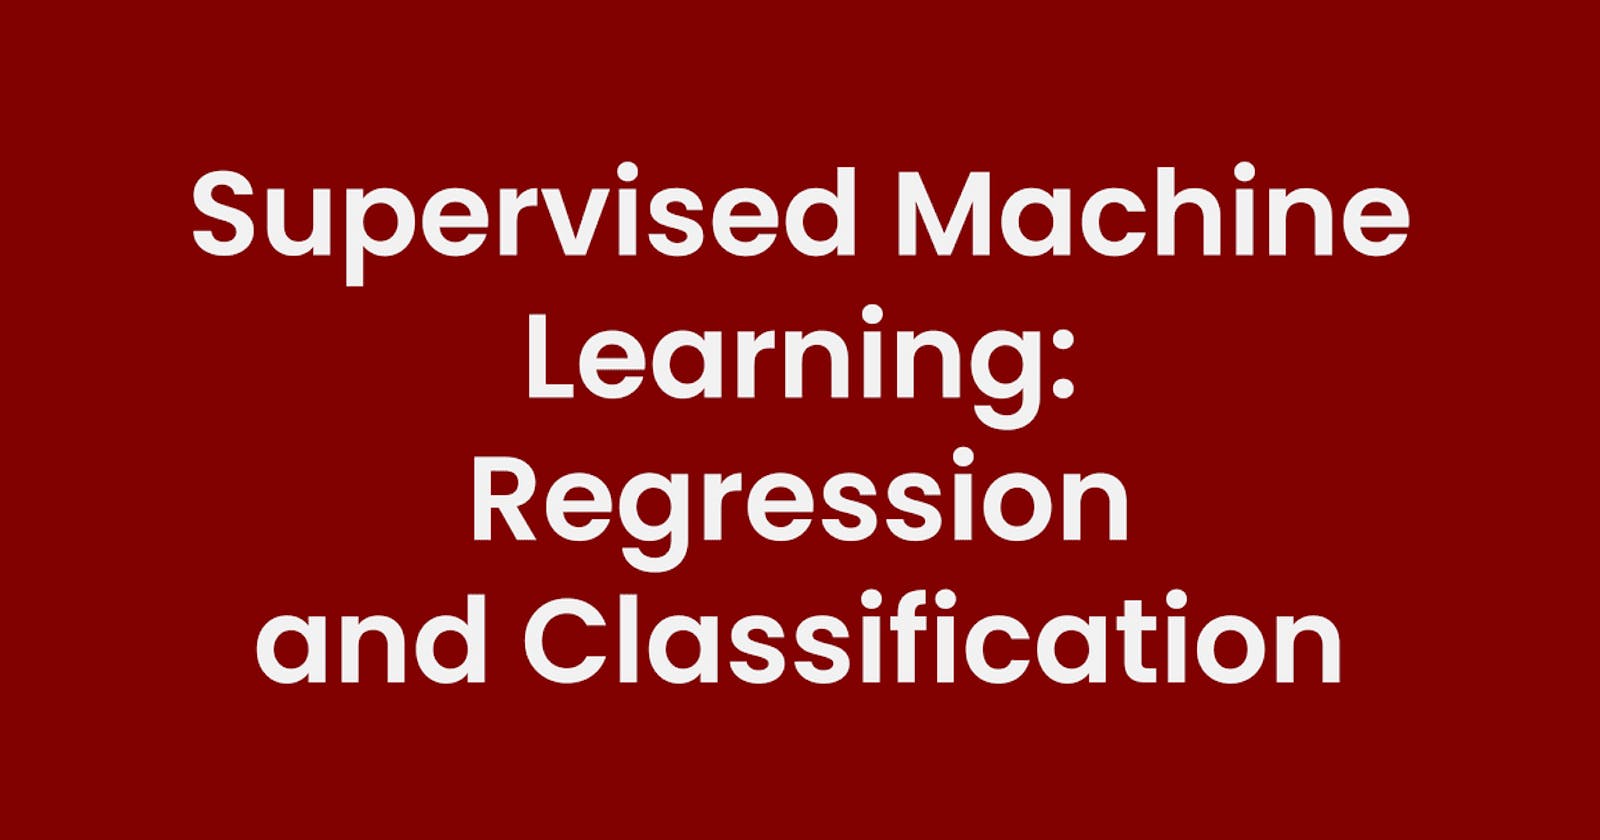 AndrewNG Course-Supervised Machine Learning: Regression and Classification,
 Quick Keypoints: